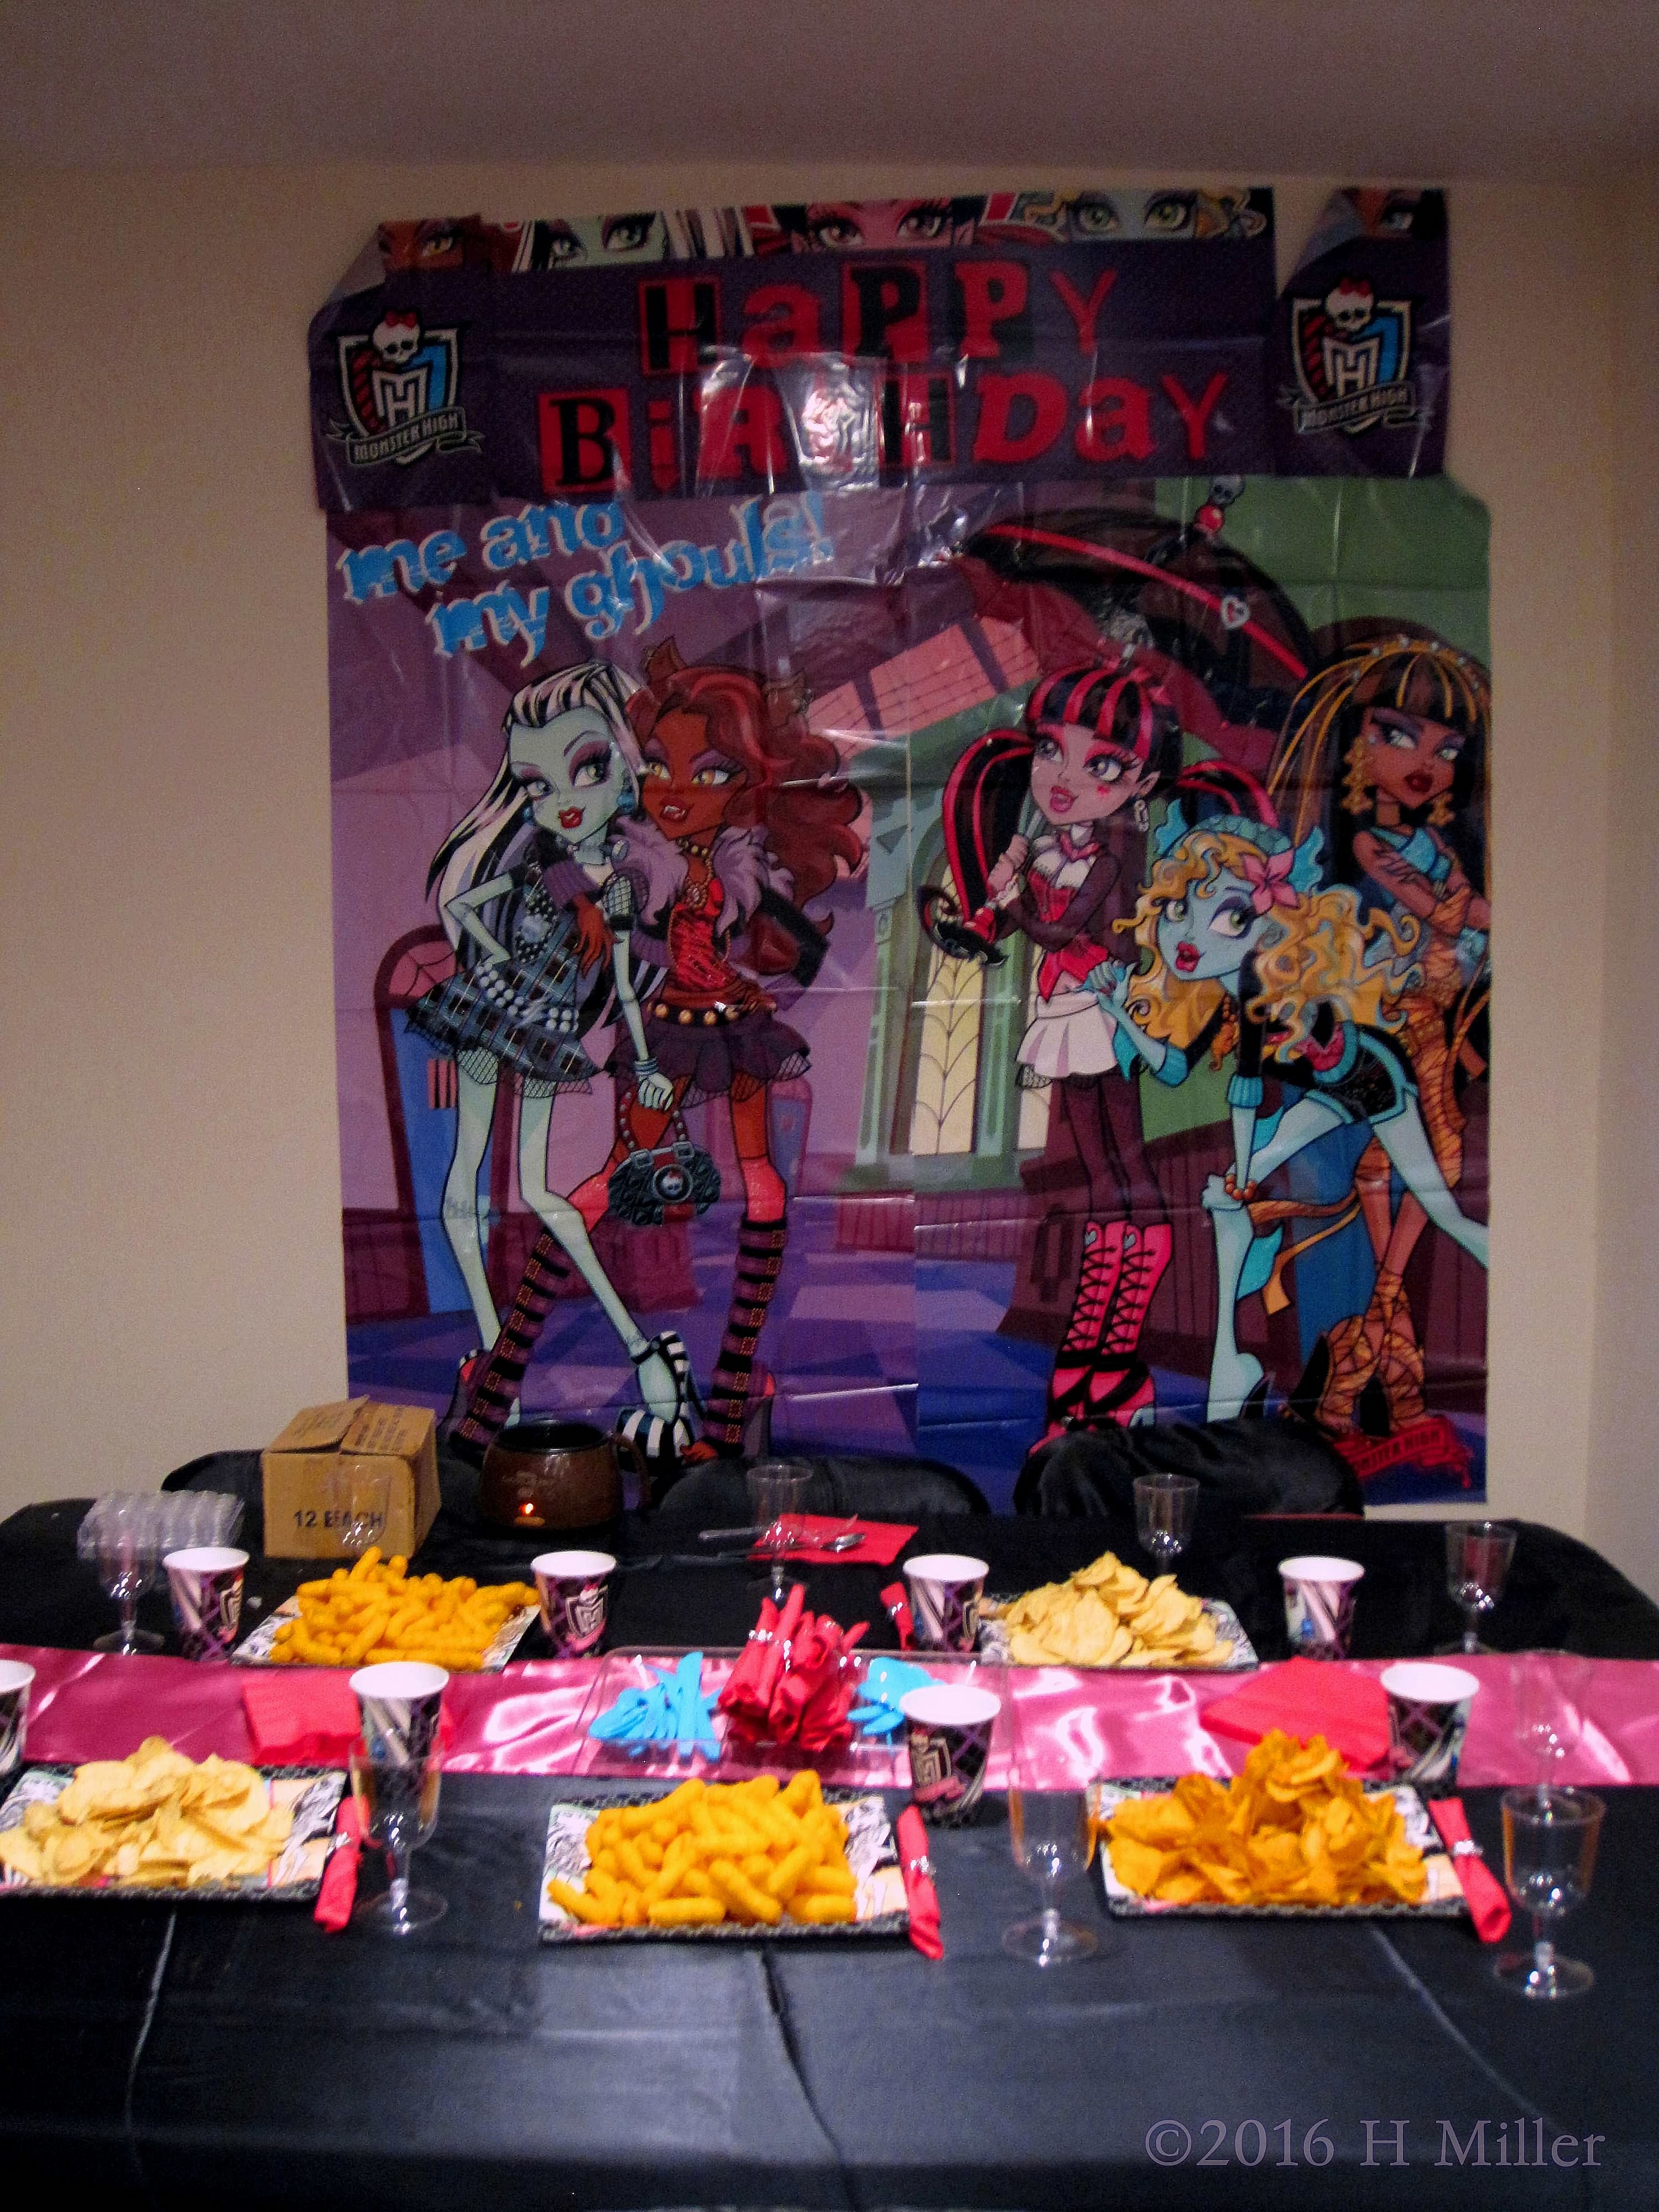 Yummy Snacks And A Monster High Theme!